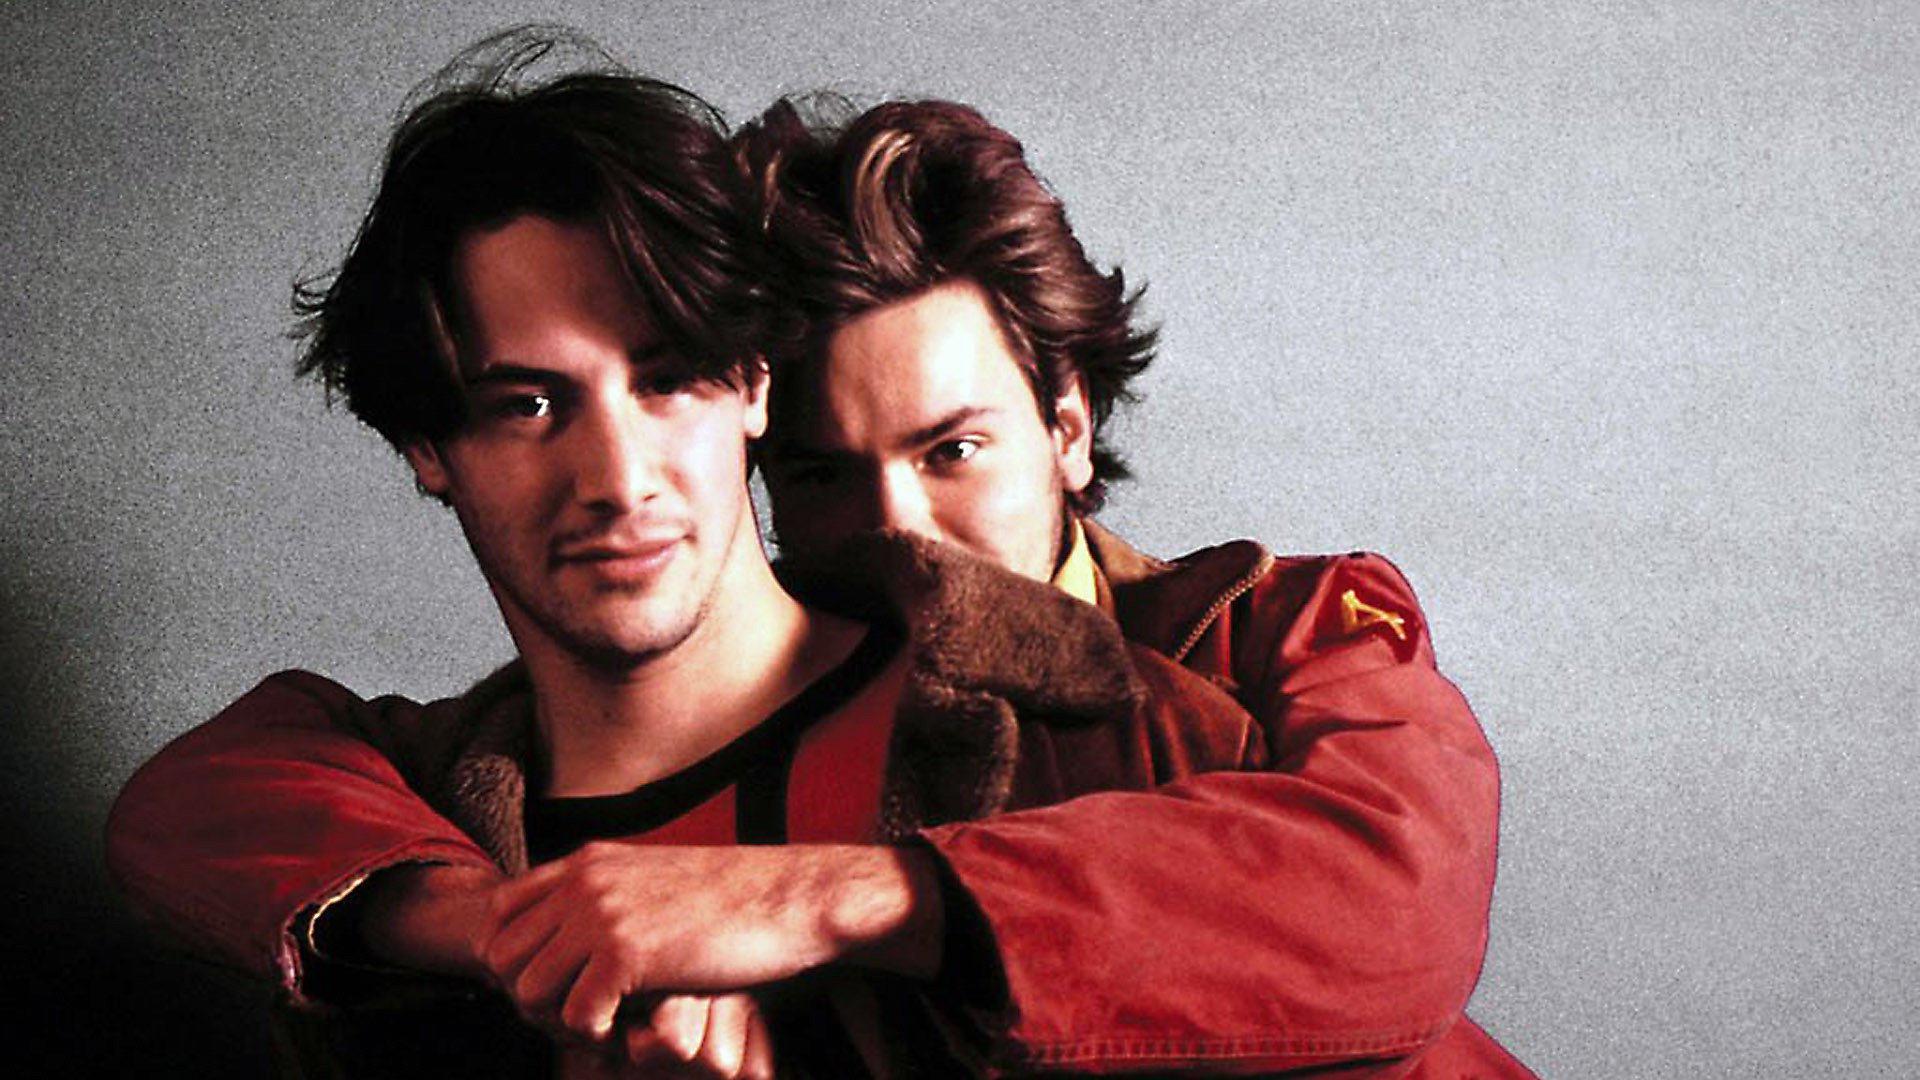 Keanu Reeves and River Phoenix - My Own Private Idaho Promos